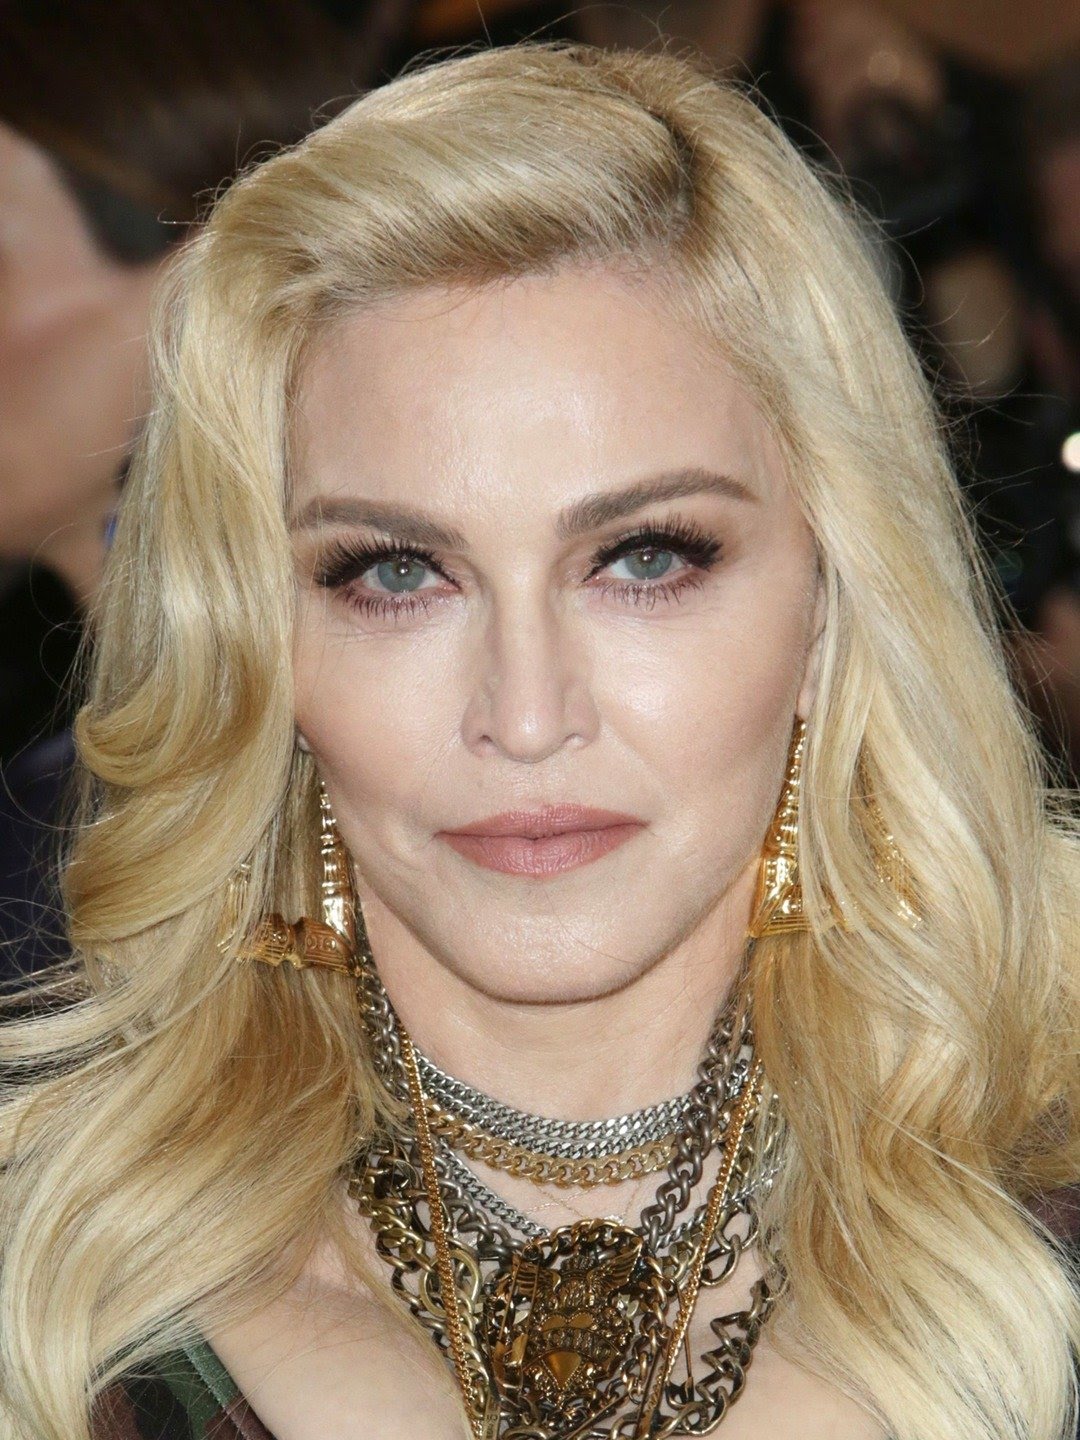 Madonna Biography: Age, Net Worth, Height, Parents, Siblings, Children, Spouse, Instagram, Songs, Awards, Wiki